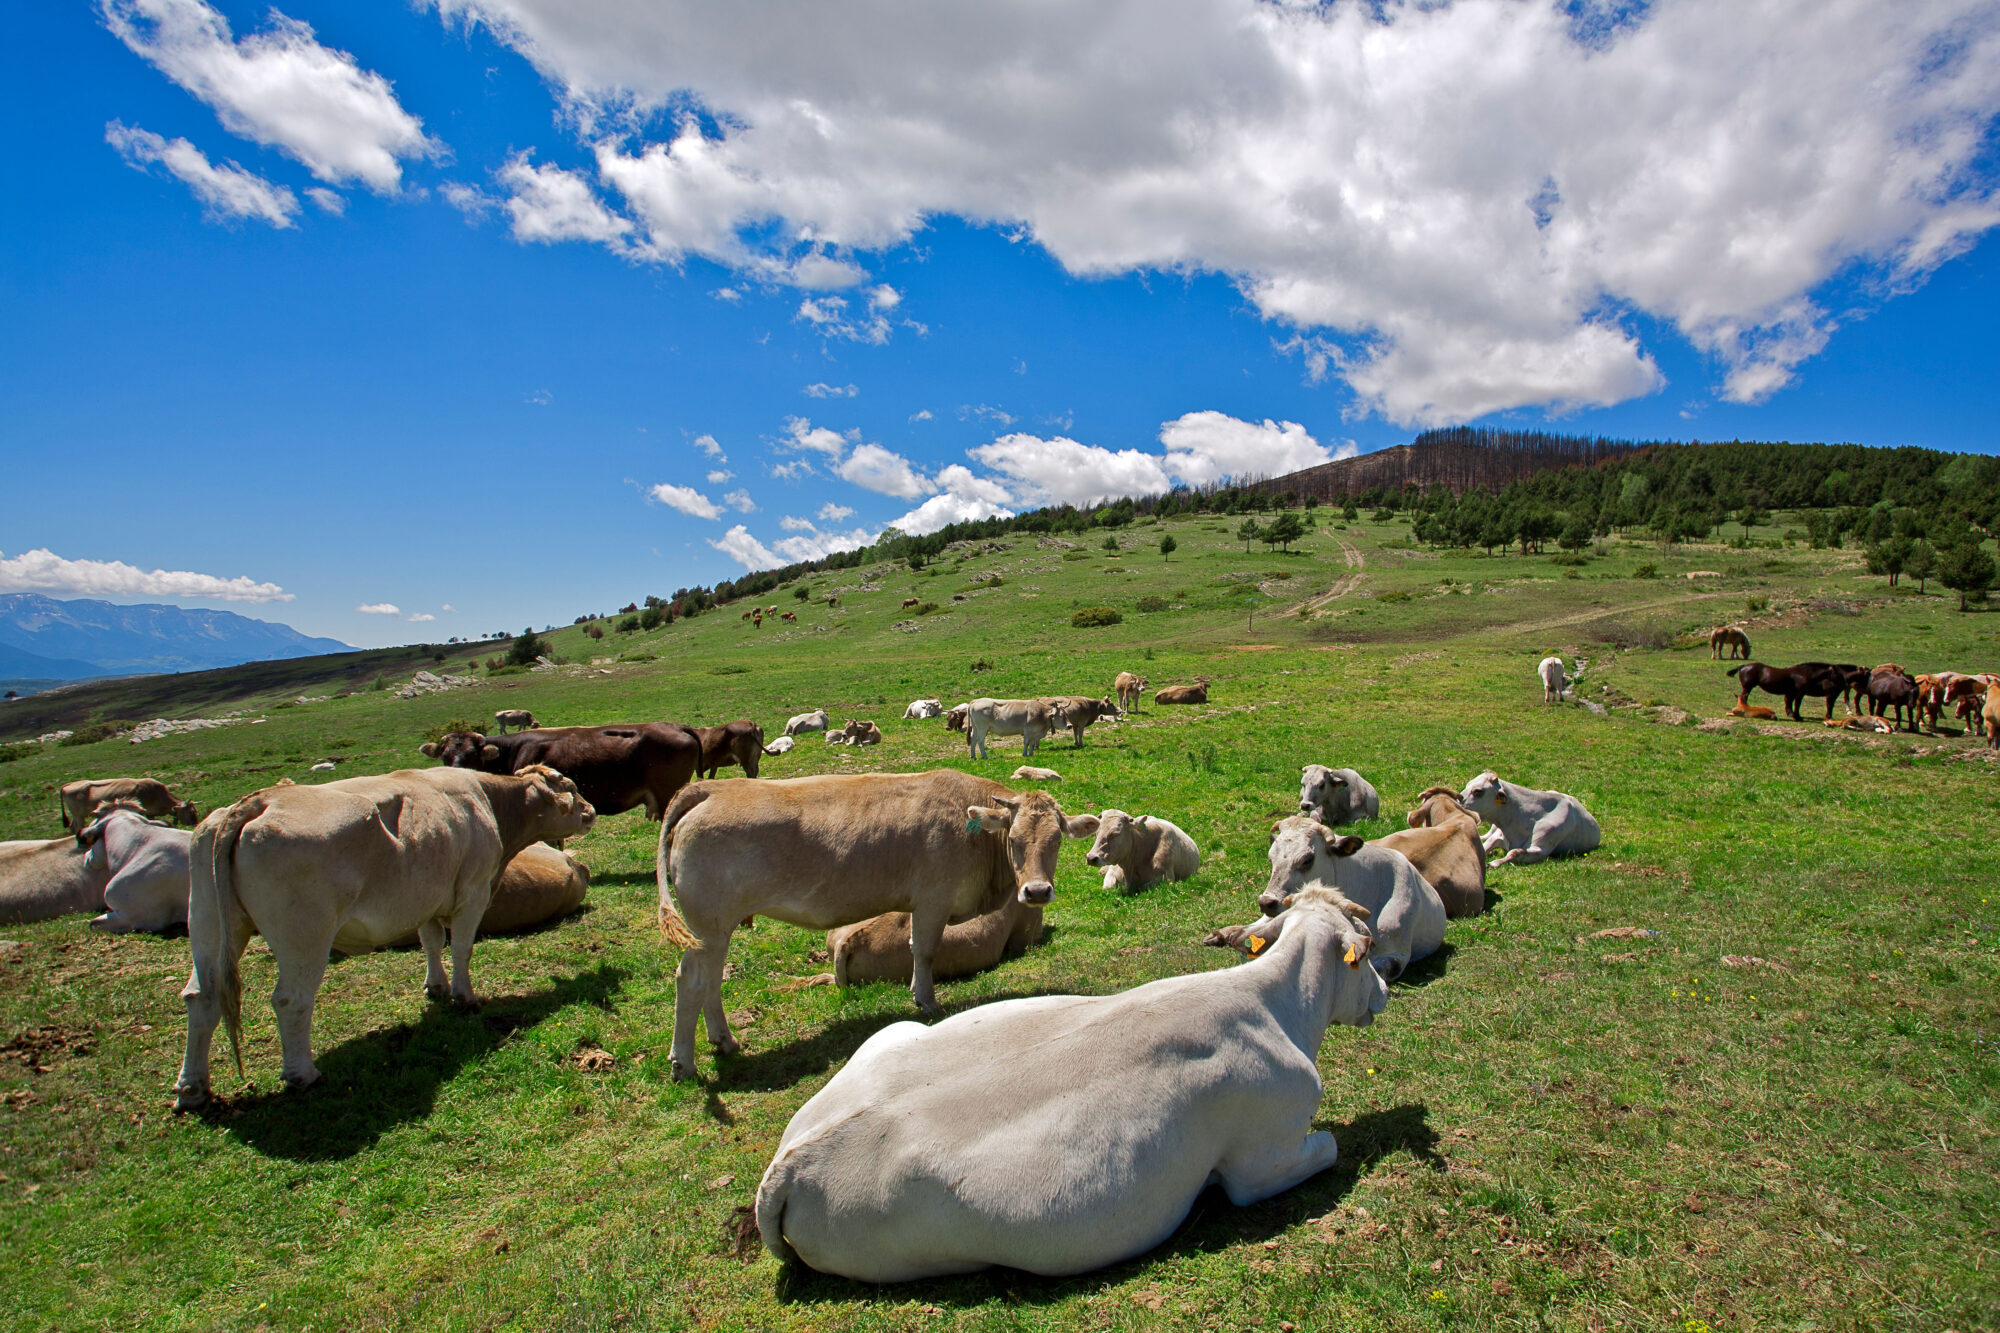 <p>A herd of cows graze at the foothills of the Pyrenees mountains, Catalunya (image: Alamy)</p>